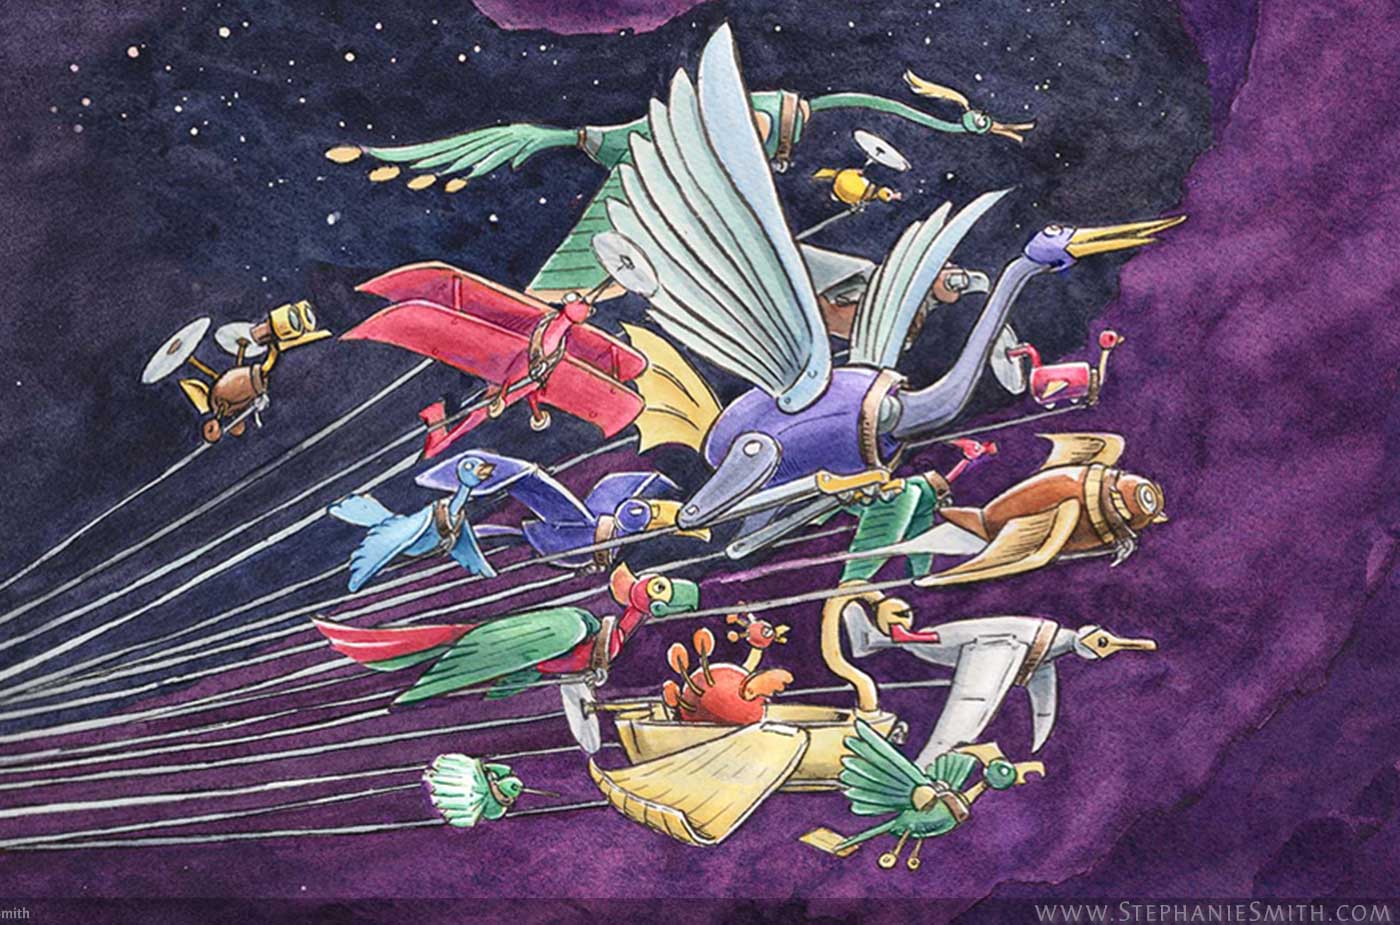 Painting of flock of robot birds flying through outer space